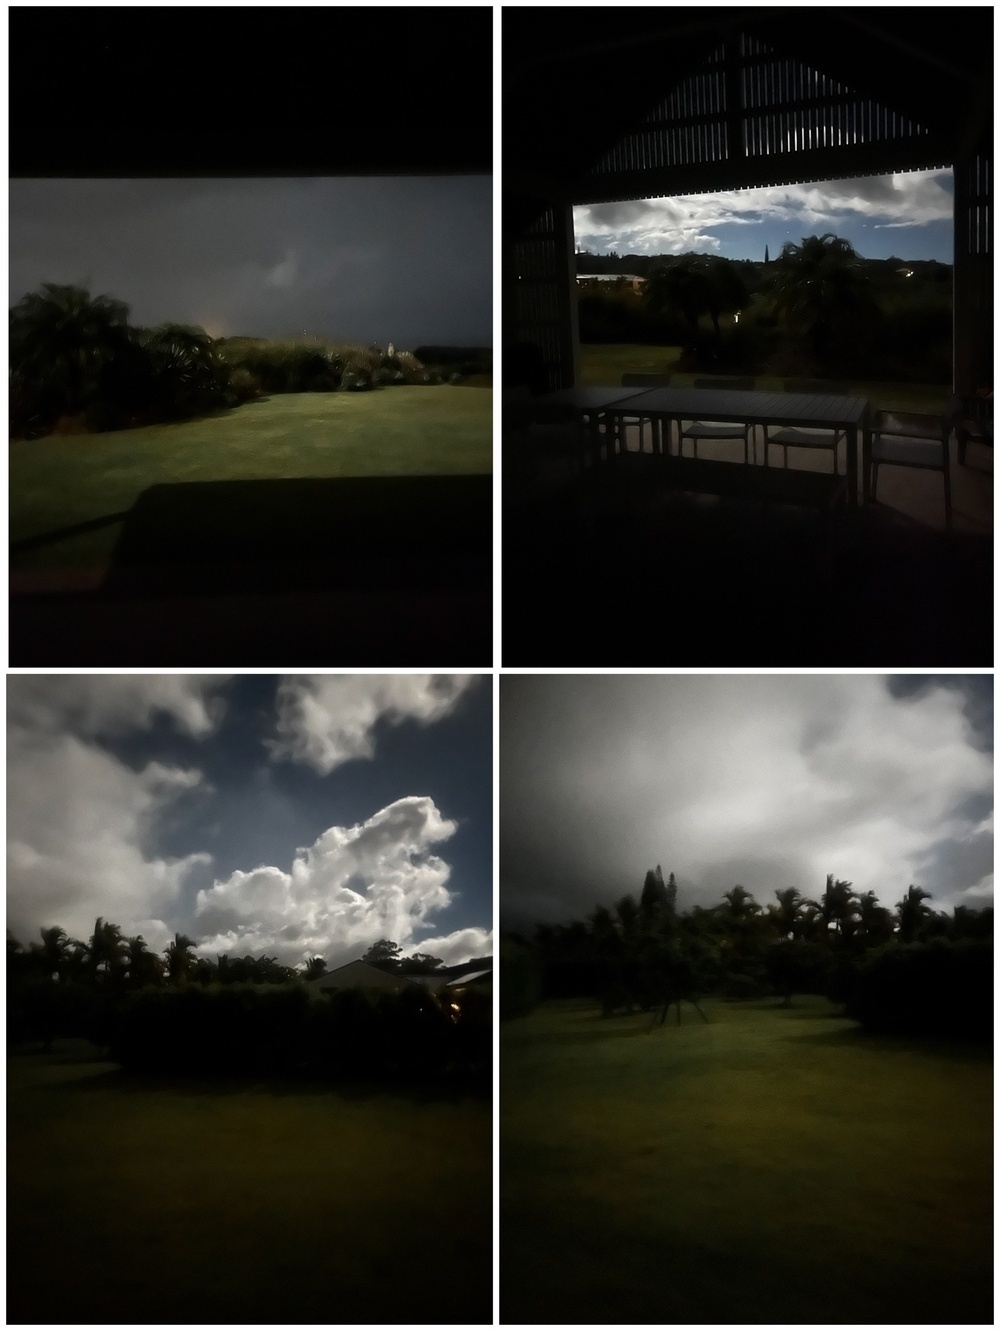 Four photographs taken during a moon lit night, are arranged in a grid, each showcasing a different perspective of a lush, green outdoor area with varying sky conditions from overcast to partly cloudy.